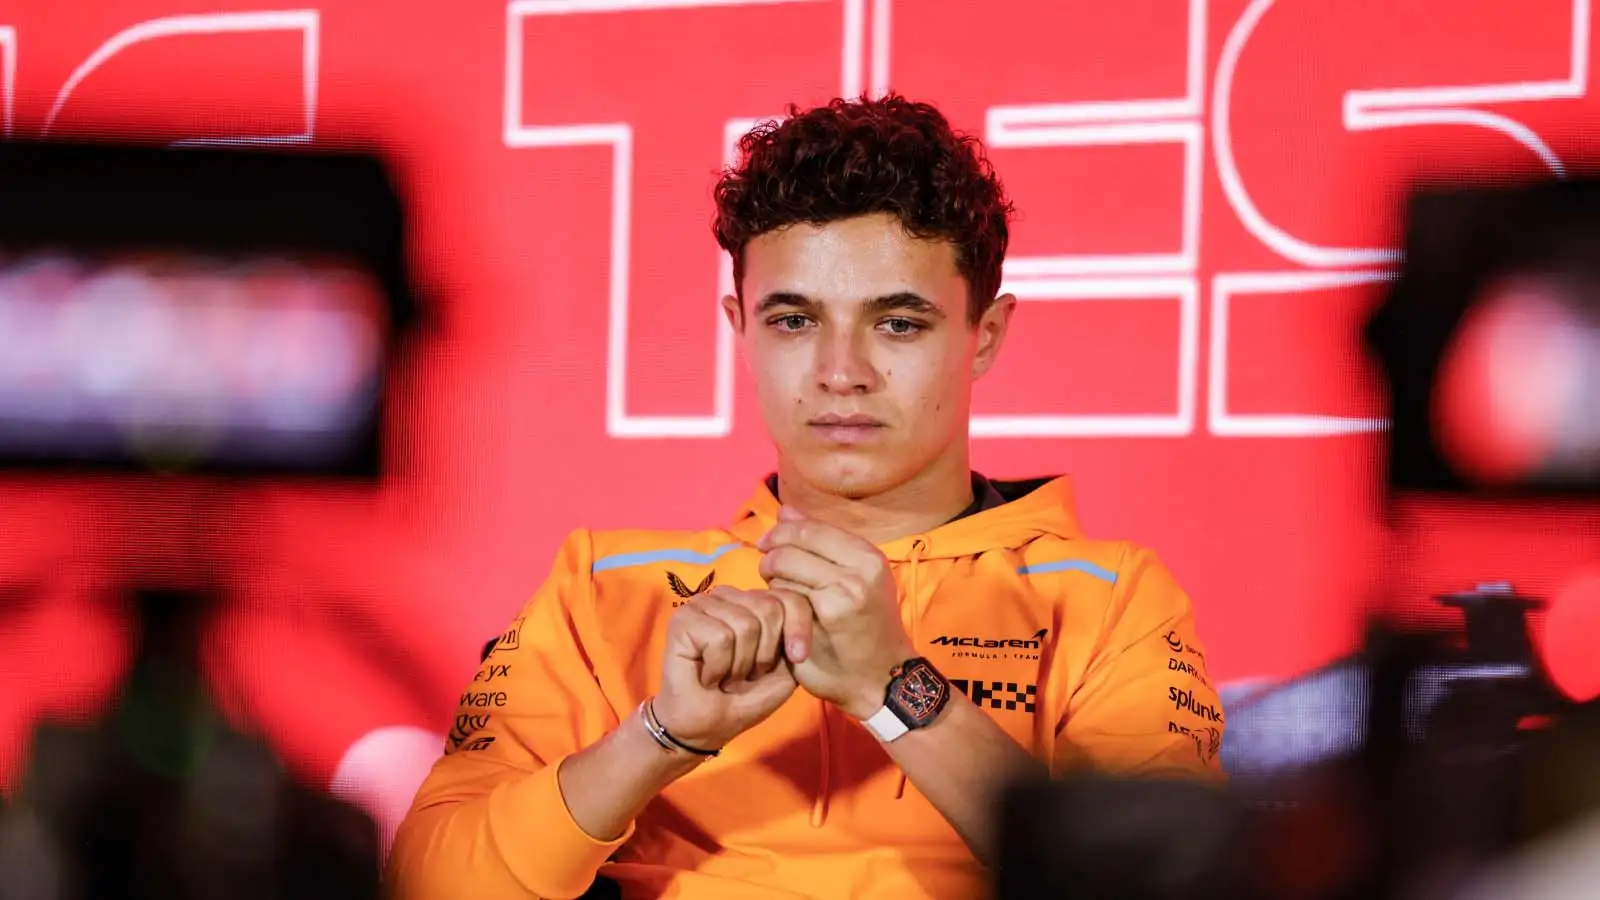 Lando Norris at a press conference. Bahrain February 2023.